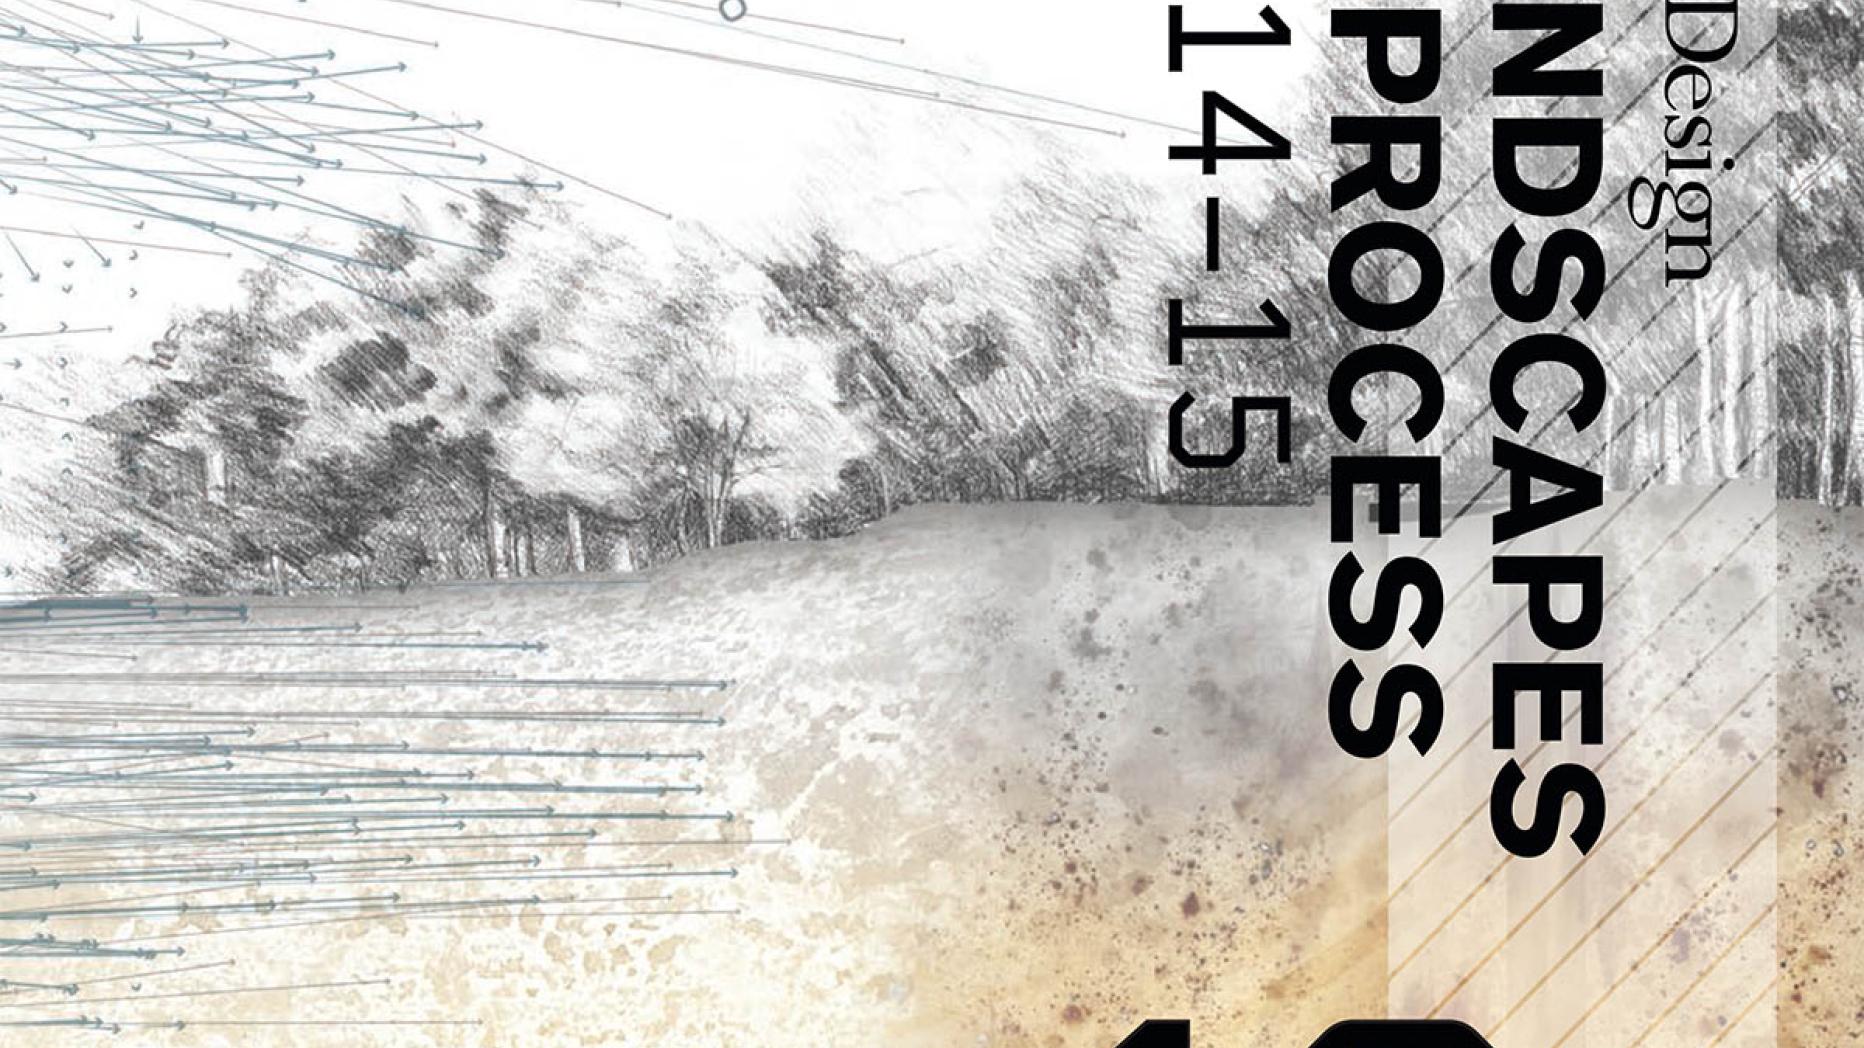 Cover for publication, "Landscapes in Process" edition 19, 2014-15